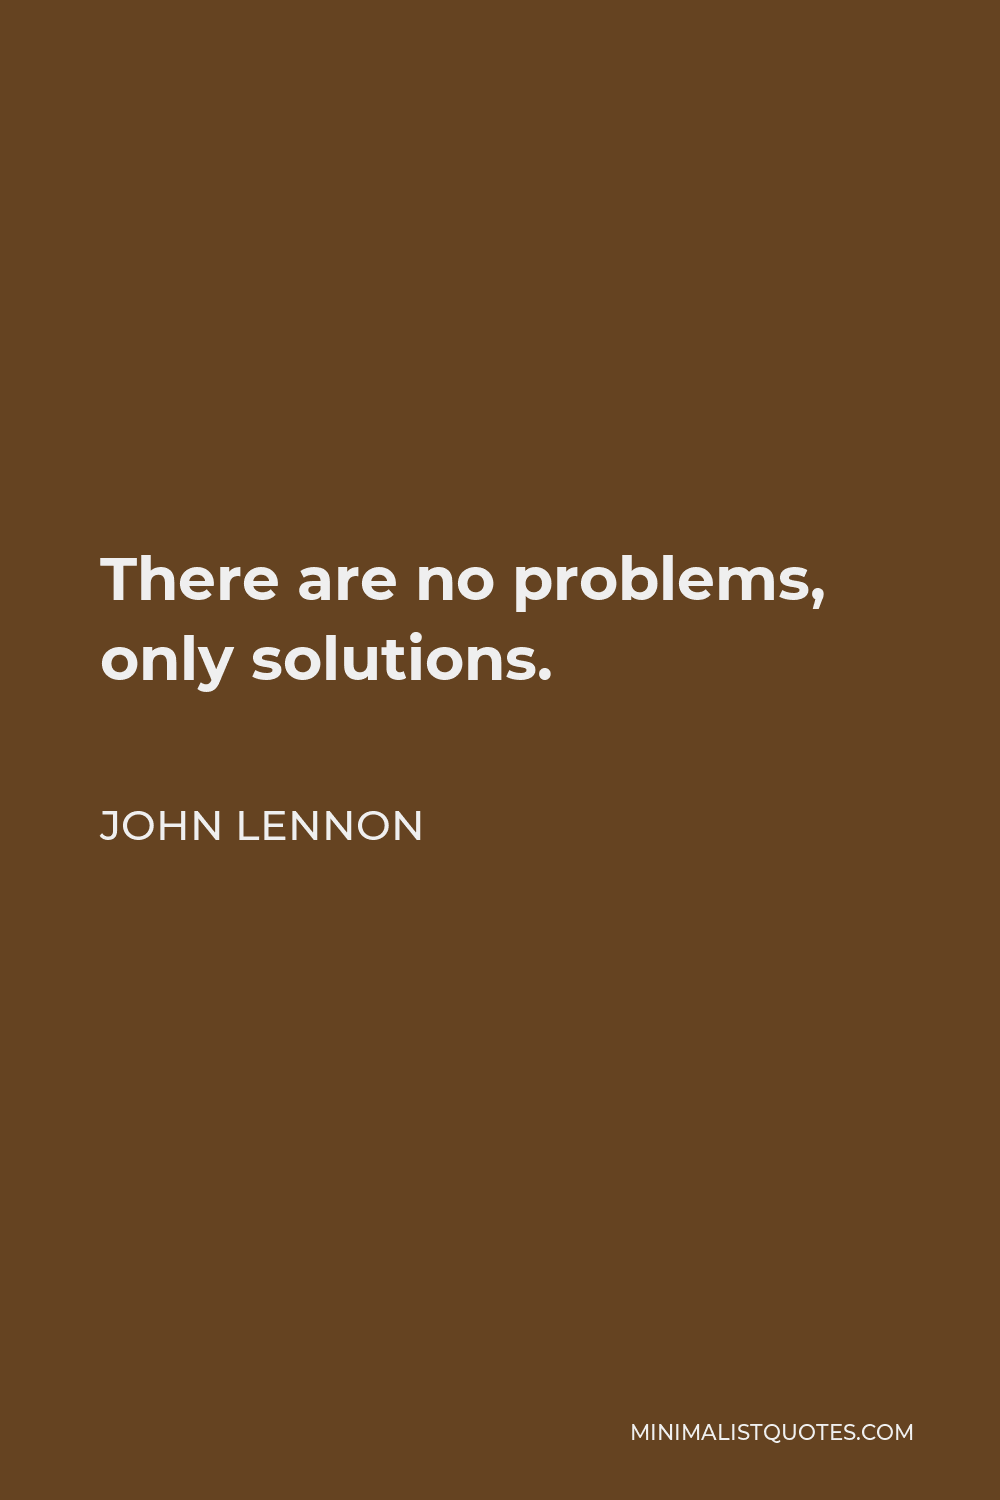 John Lennon Quote - There are no problems, only solutions.